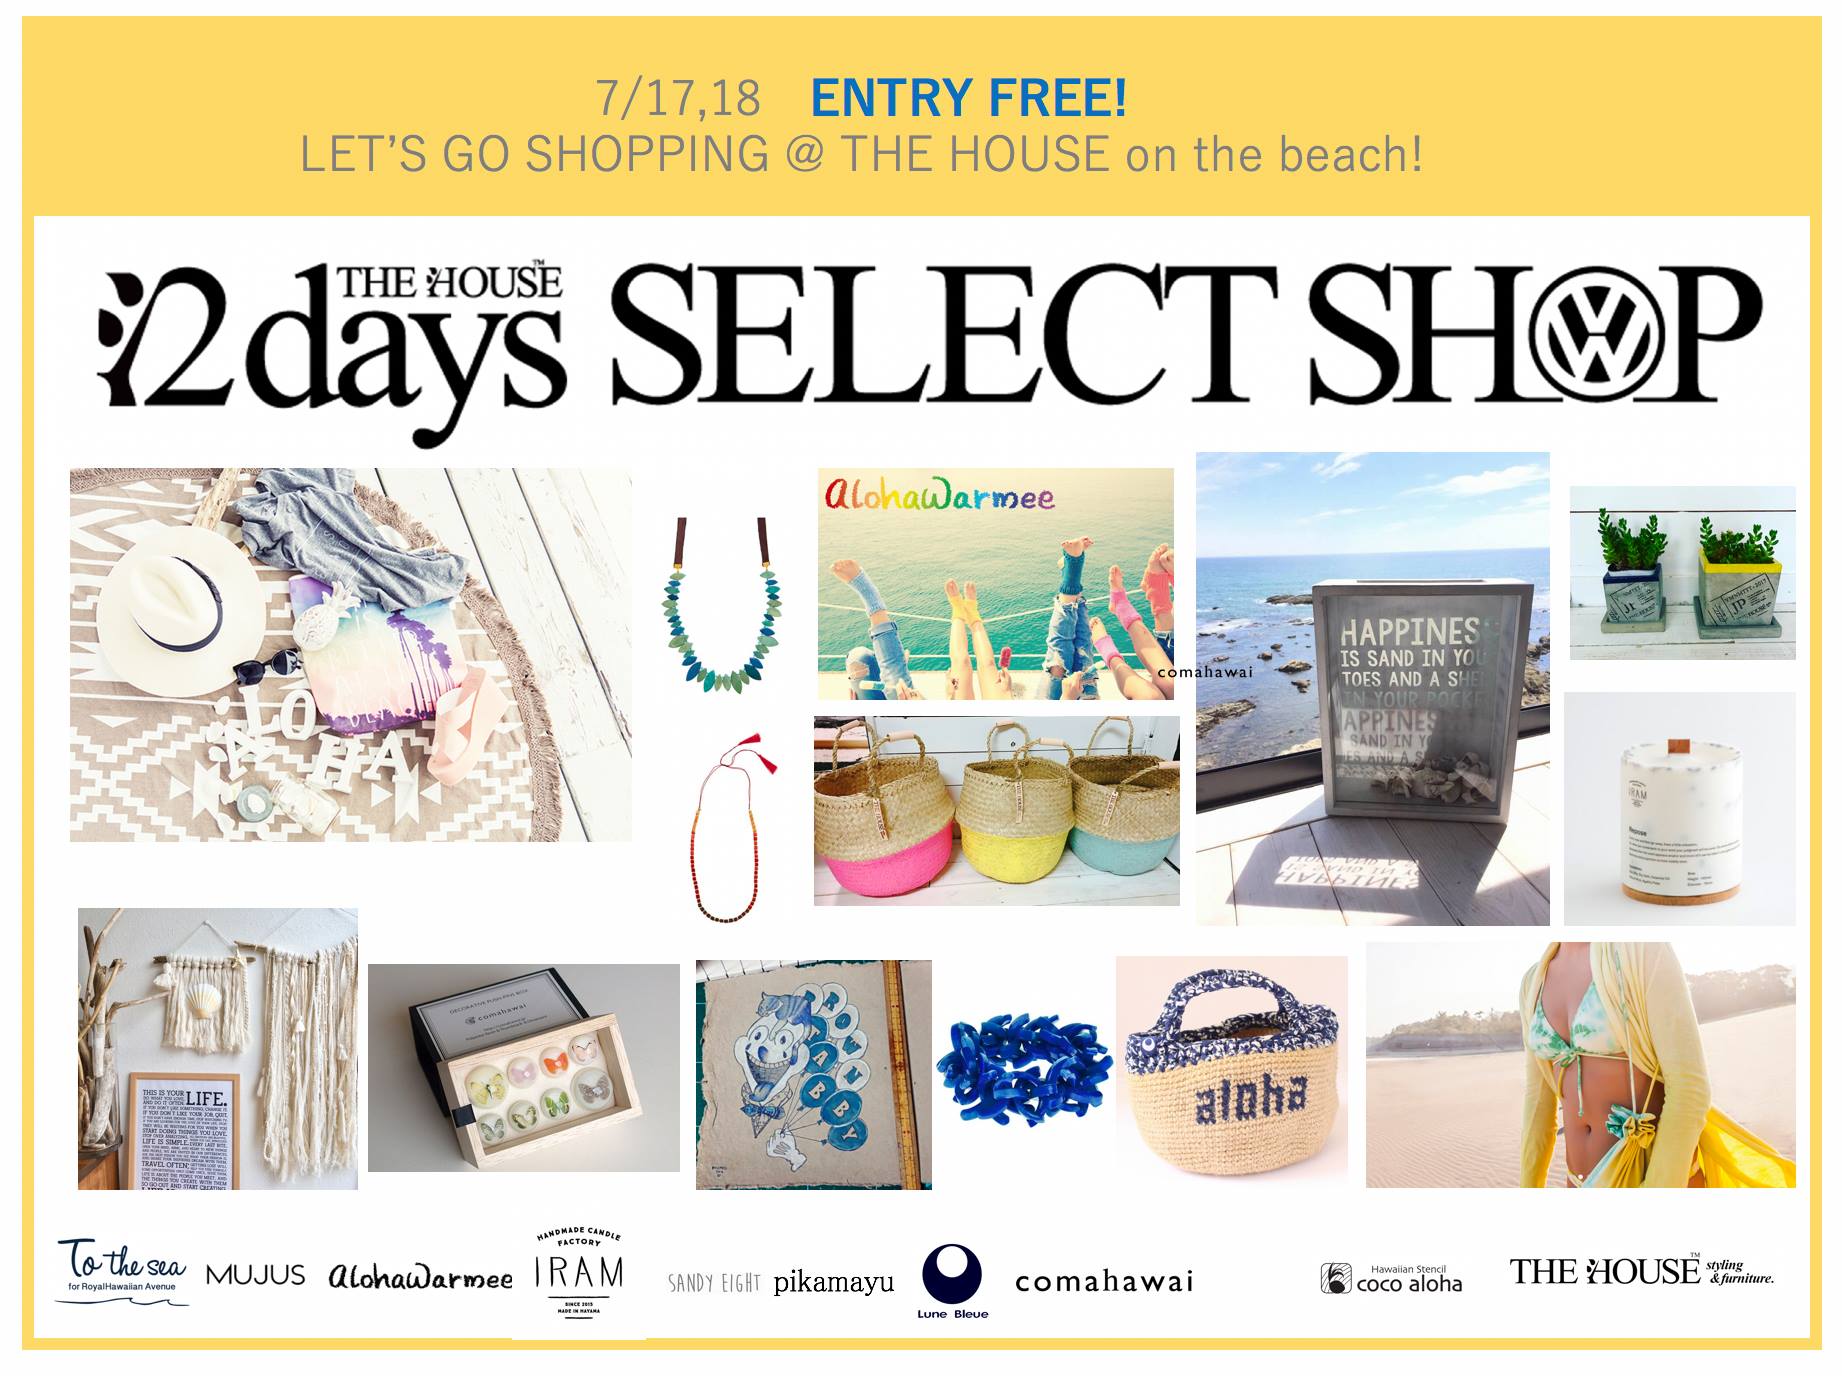 The HOUSE「2days SELECTSHOP」